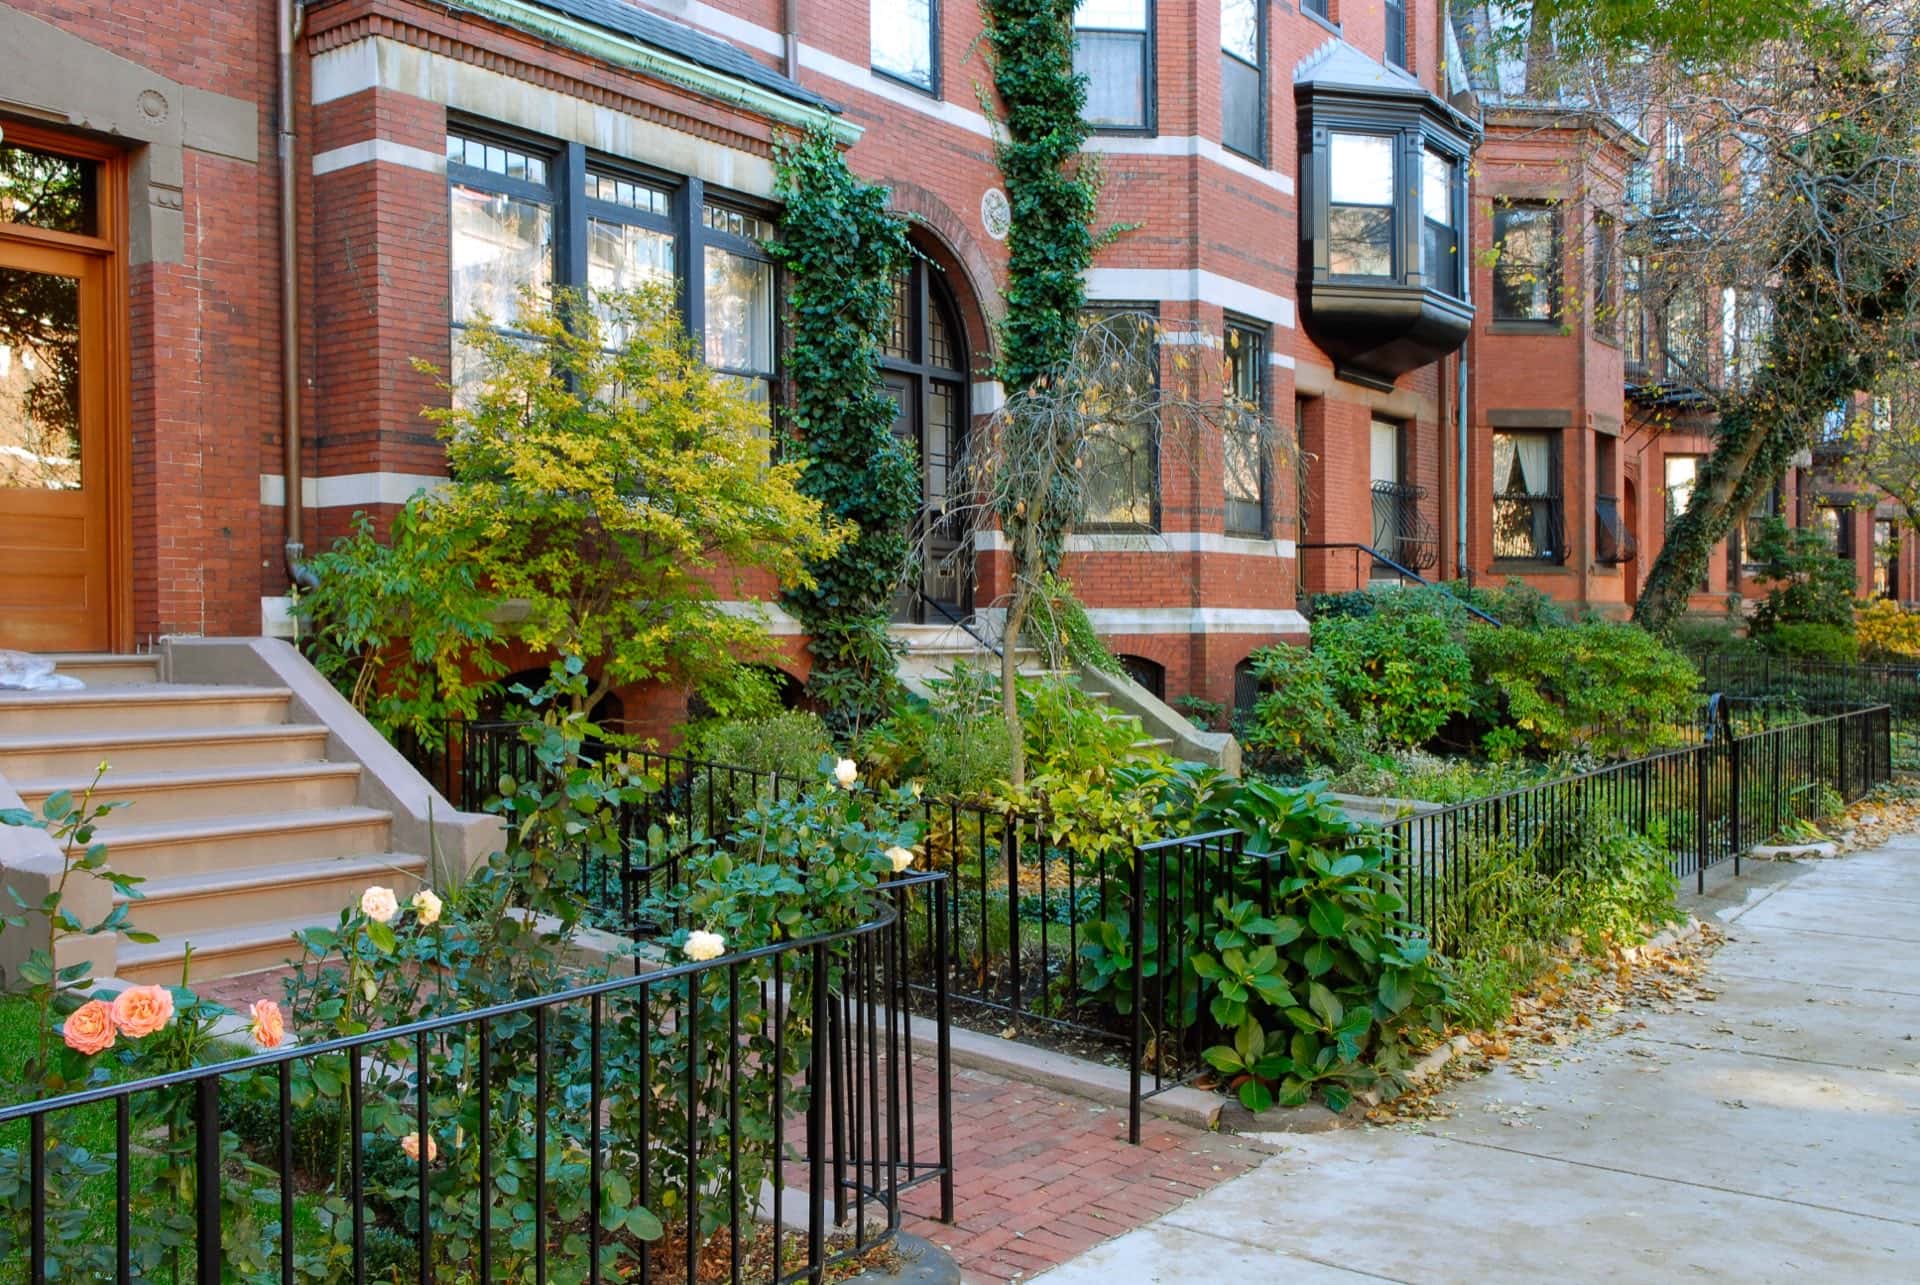 Red brick walk-up townhomes in a row with short black iron fencing.